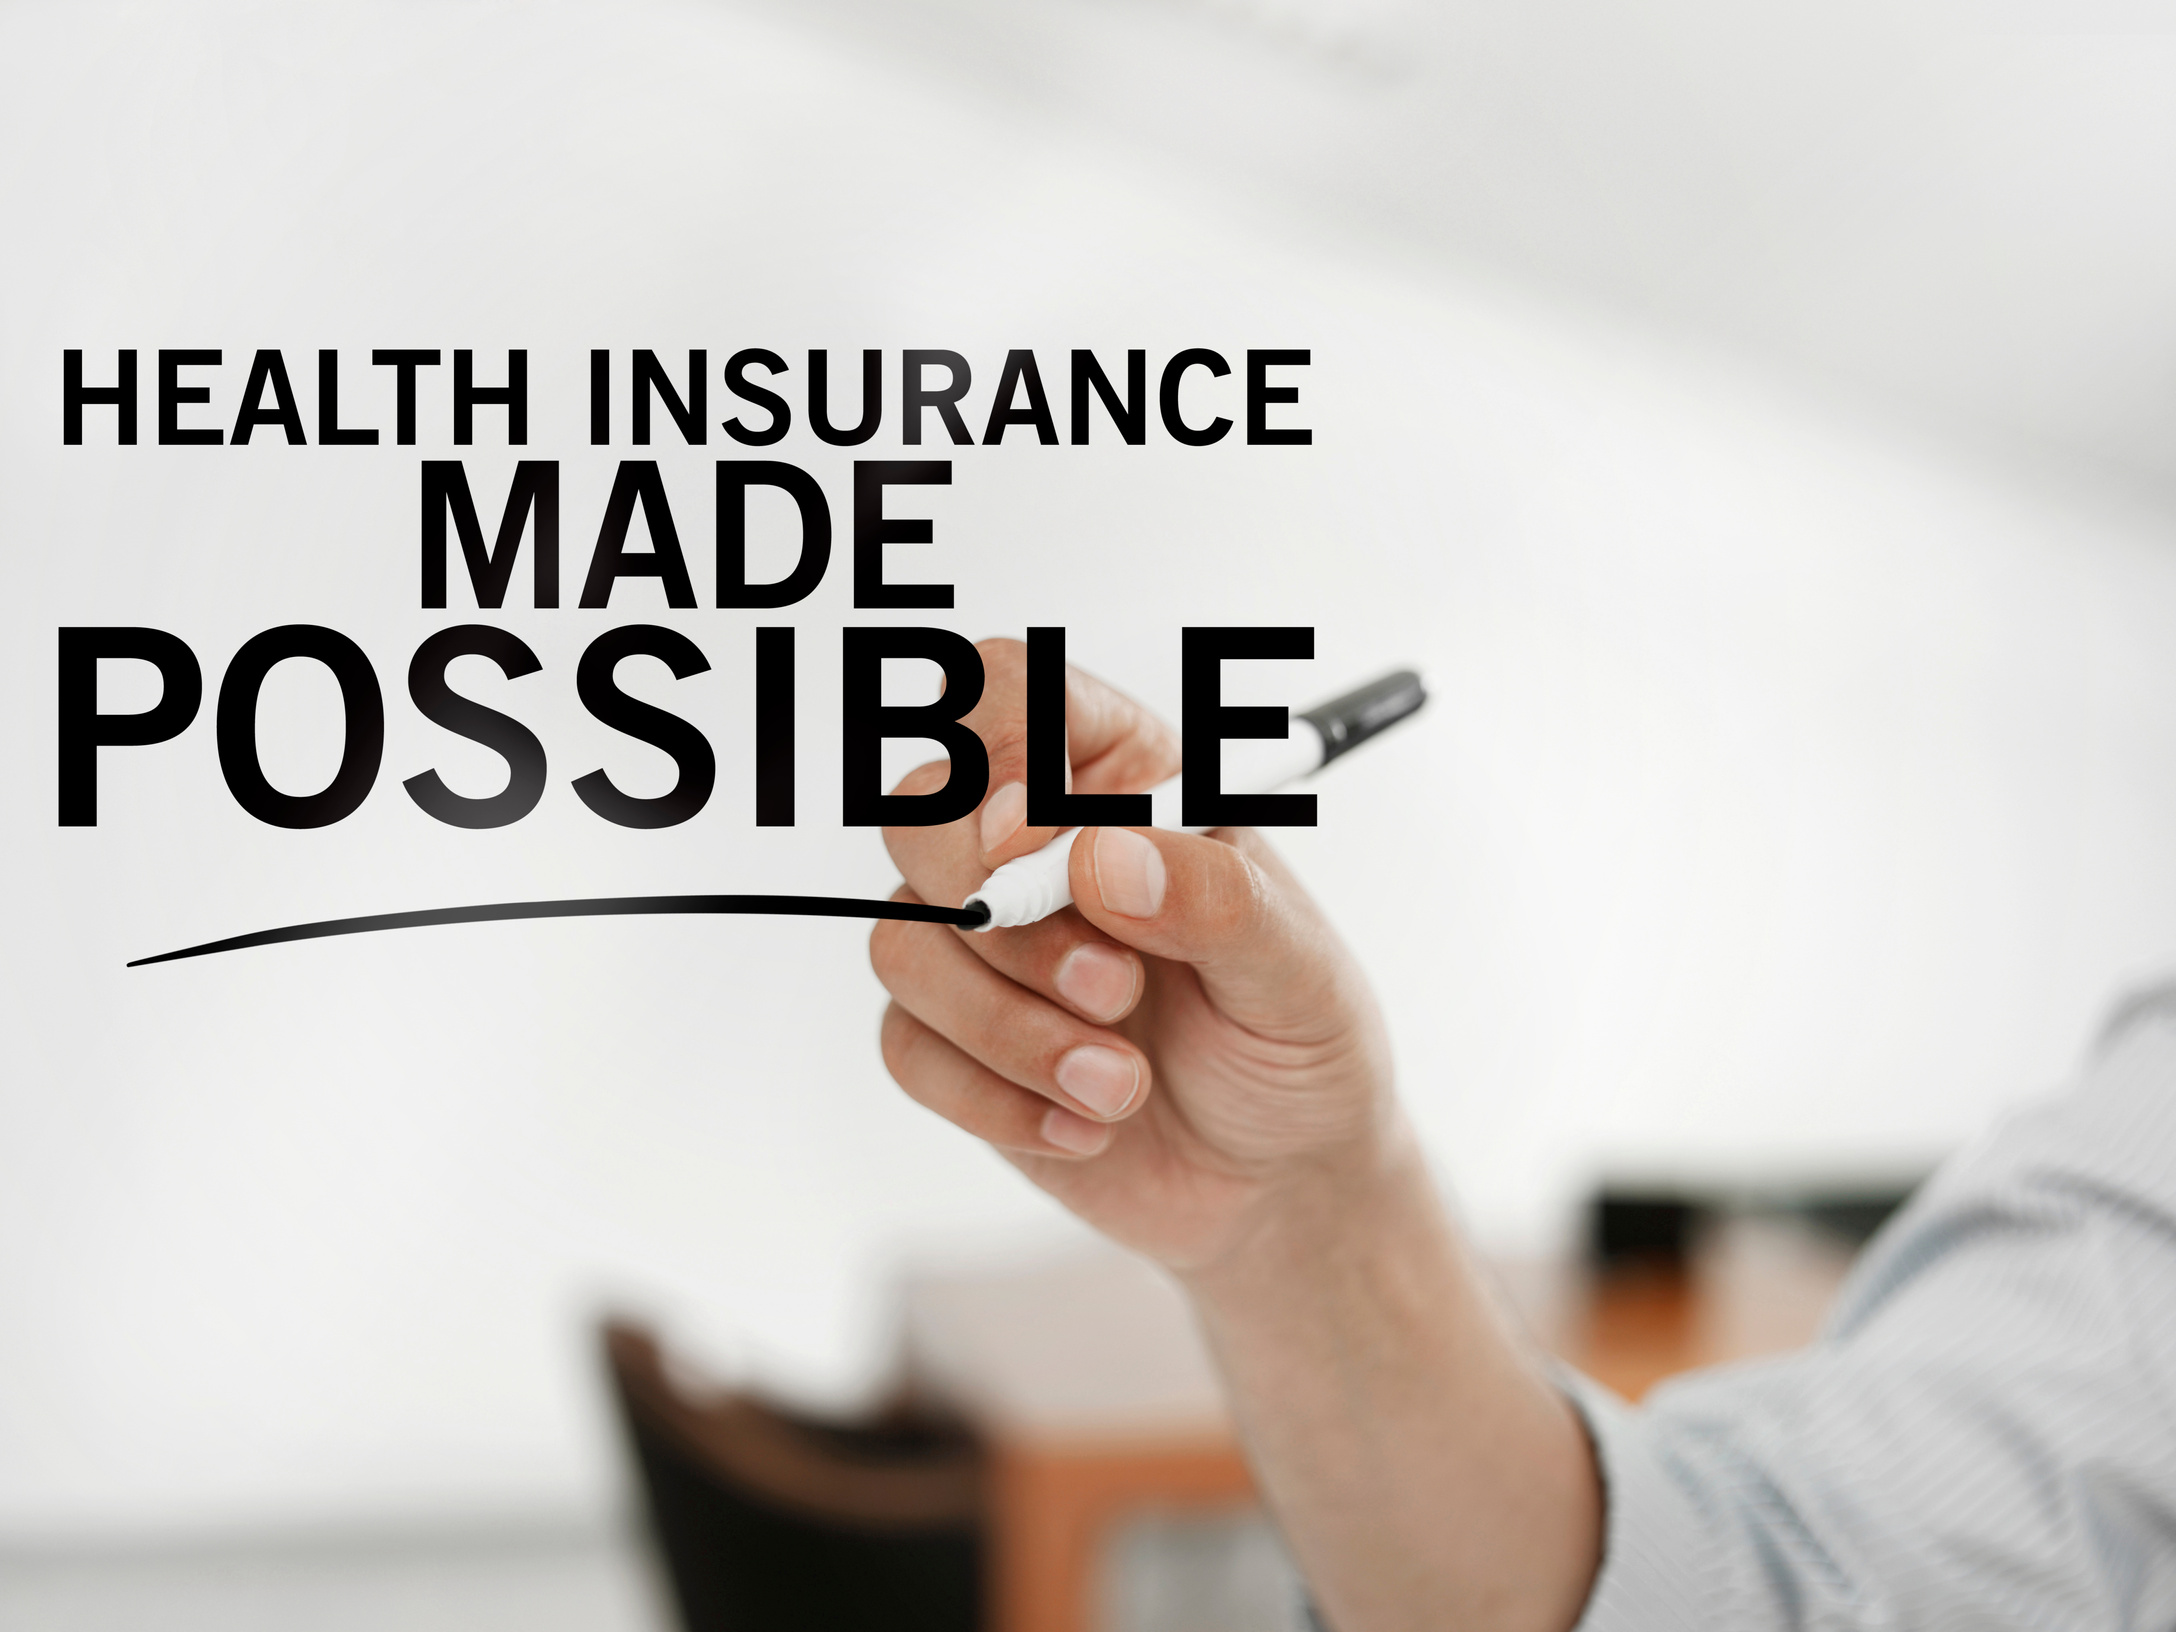 Health insurance made possible